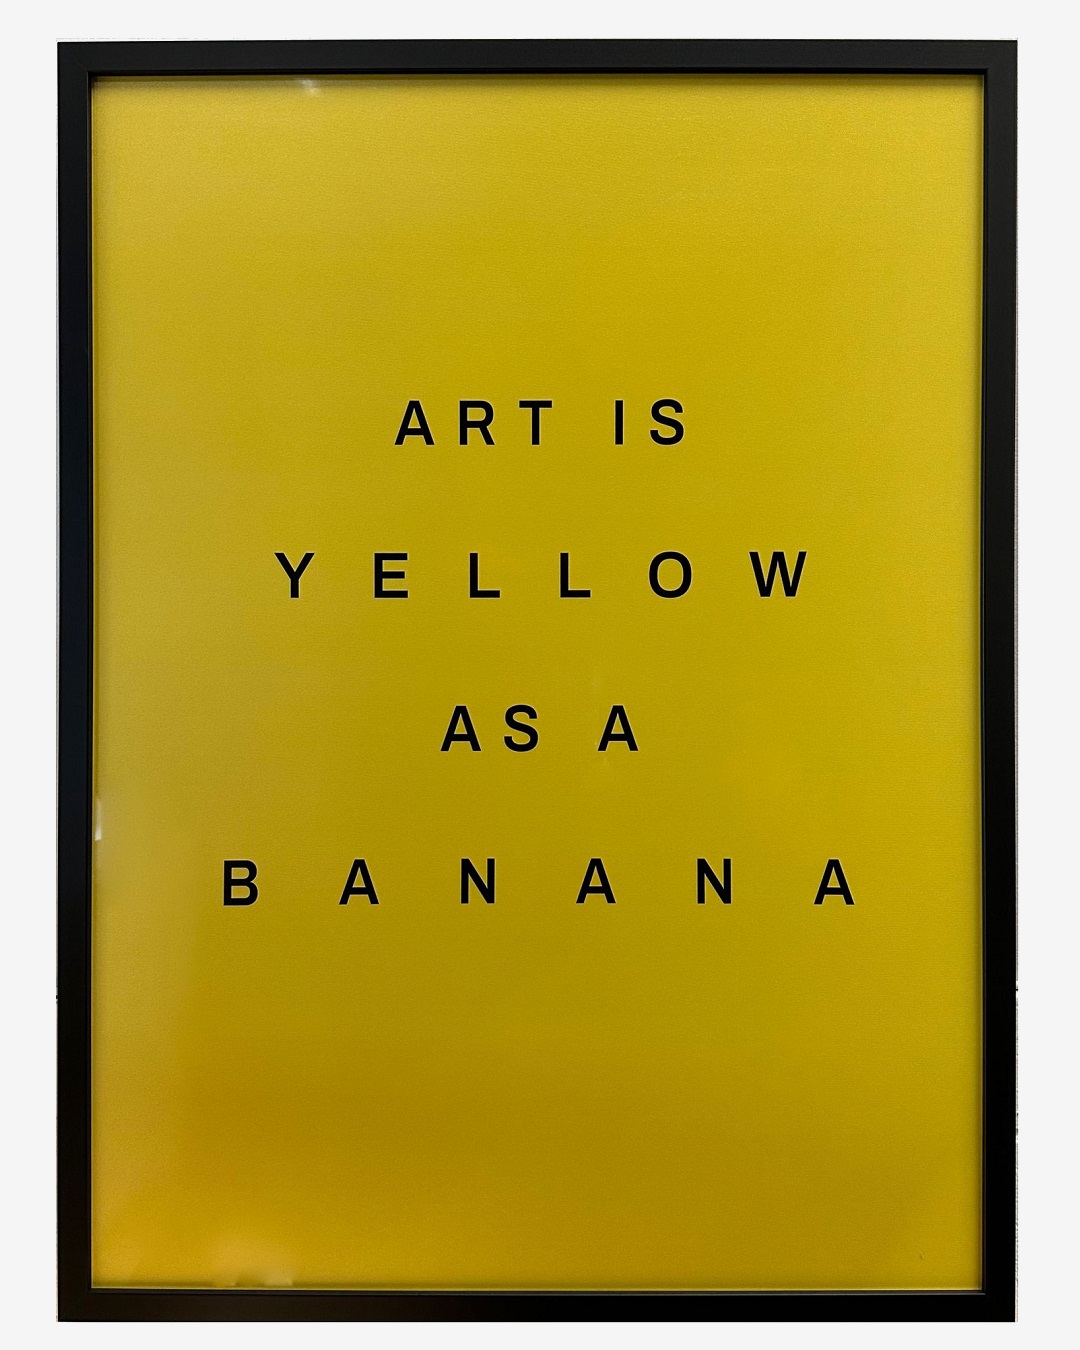 Yellow framed art that says art is yellow as a banana